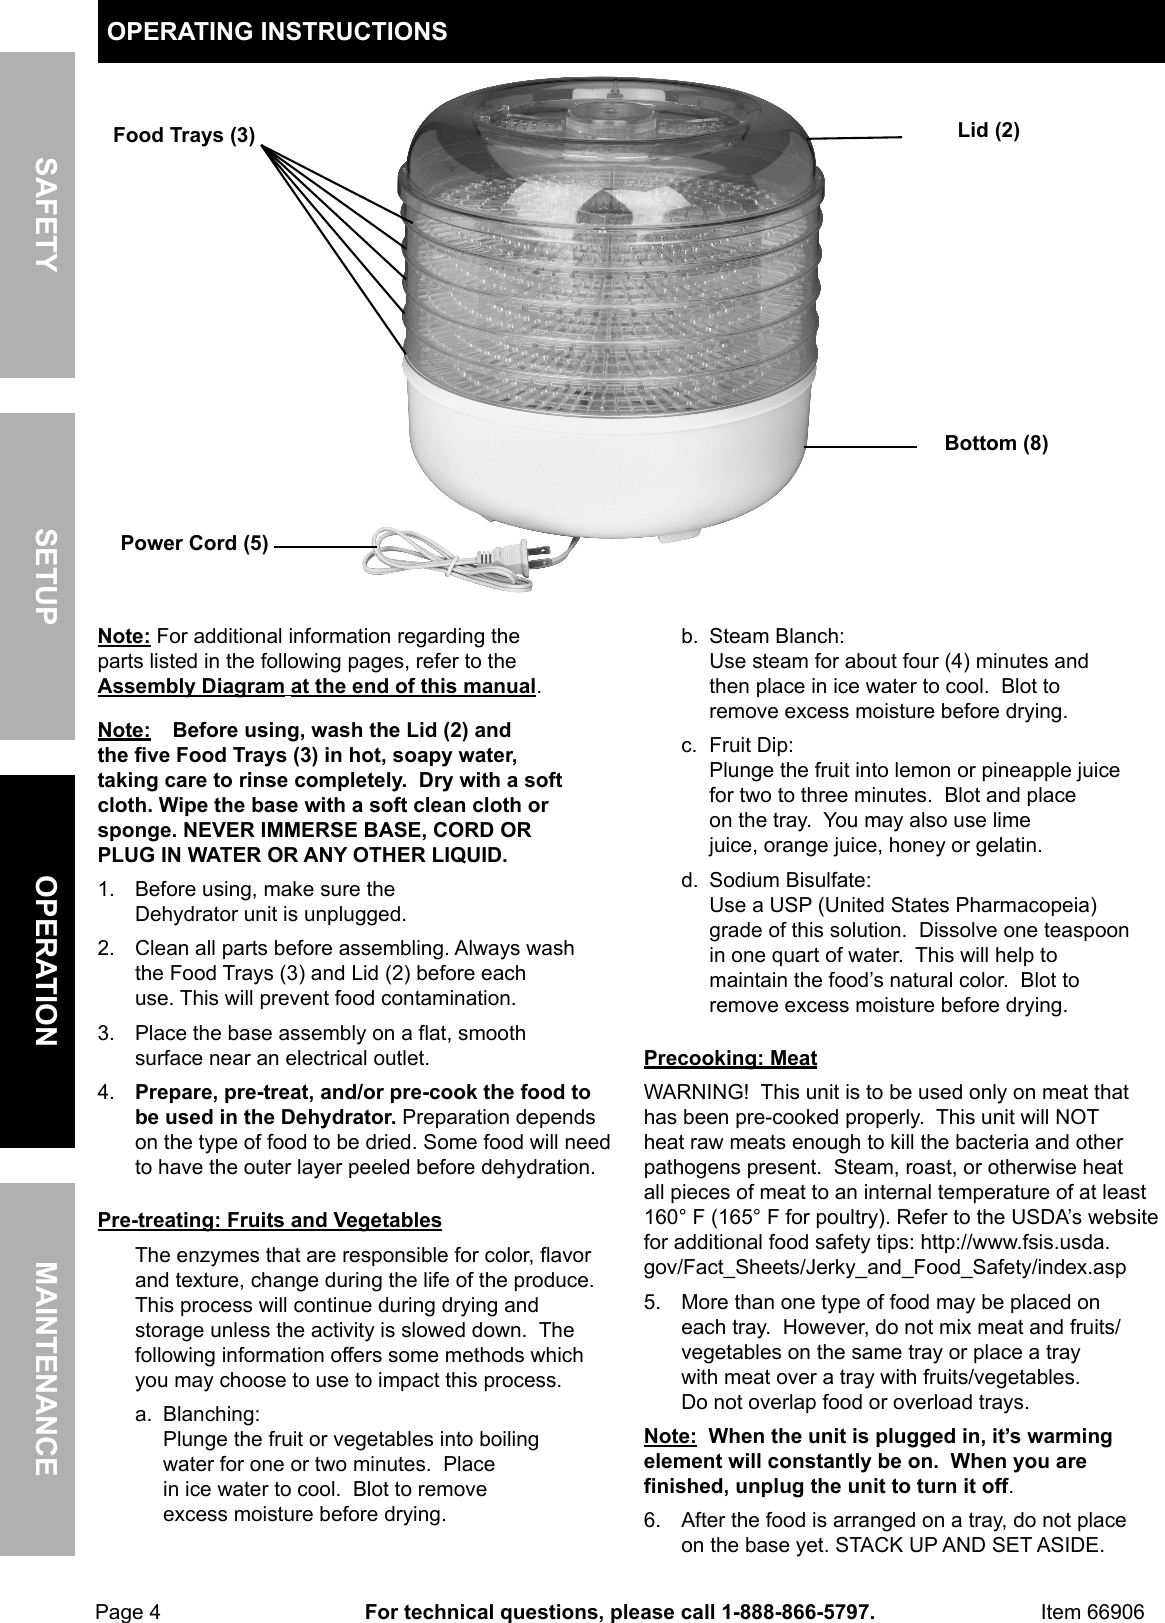 Page 4 of 8 - Harbor-Freight Harbor-Freight-5-Tier-Food-Dehydrator-Product-Manual-  Harbor-freight-5-tier-food-dehydrator-product-manual